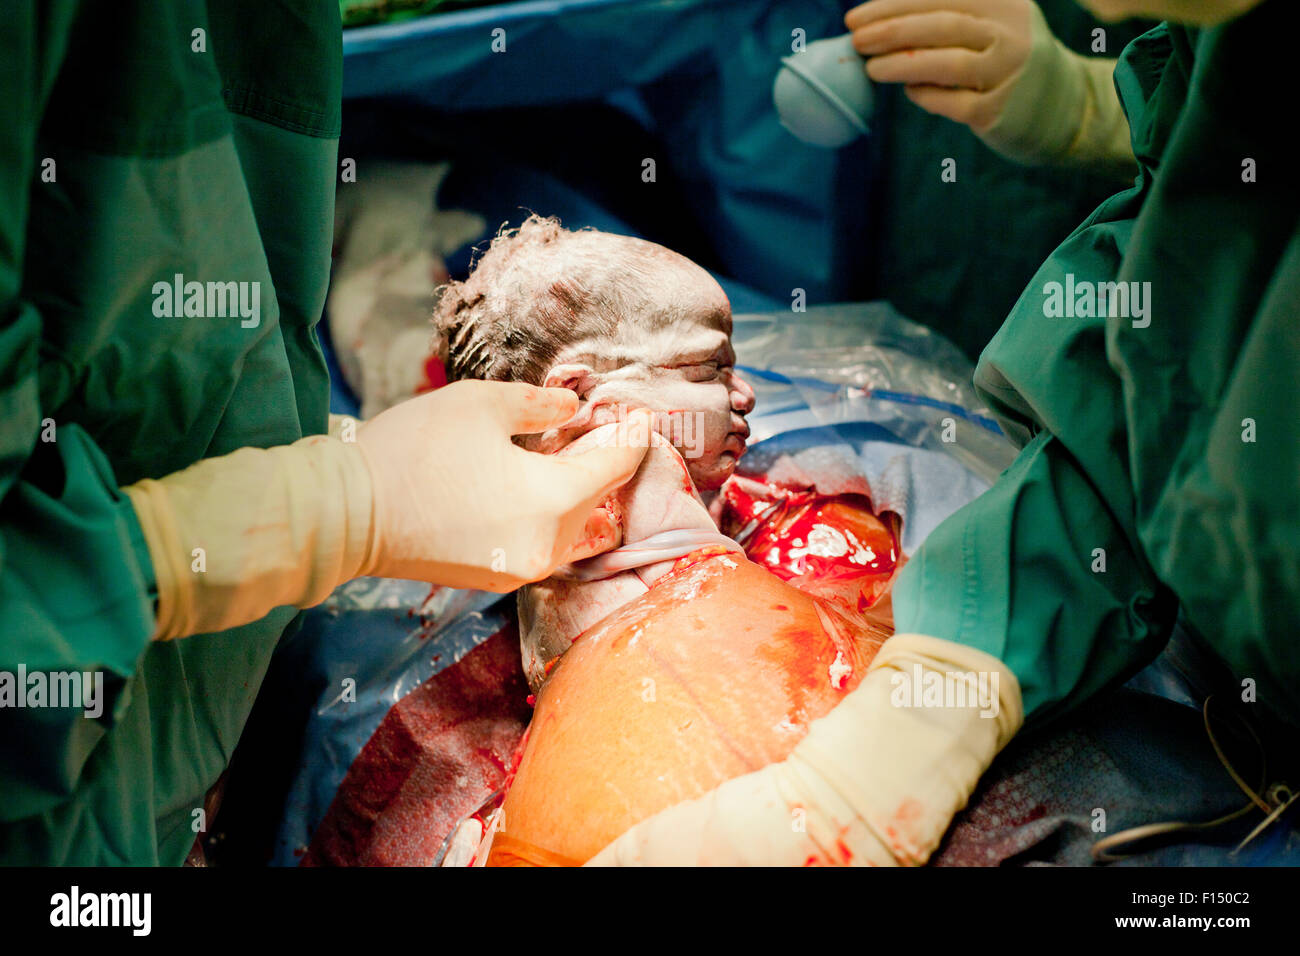 Baby being born via cesarian section operation Stock Photo